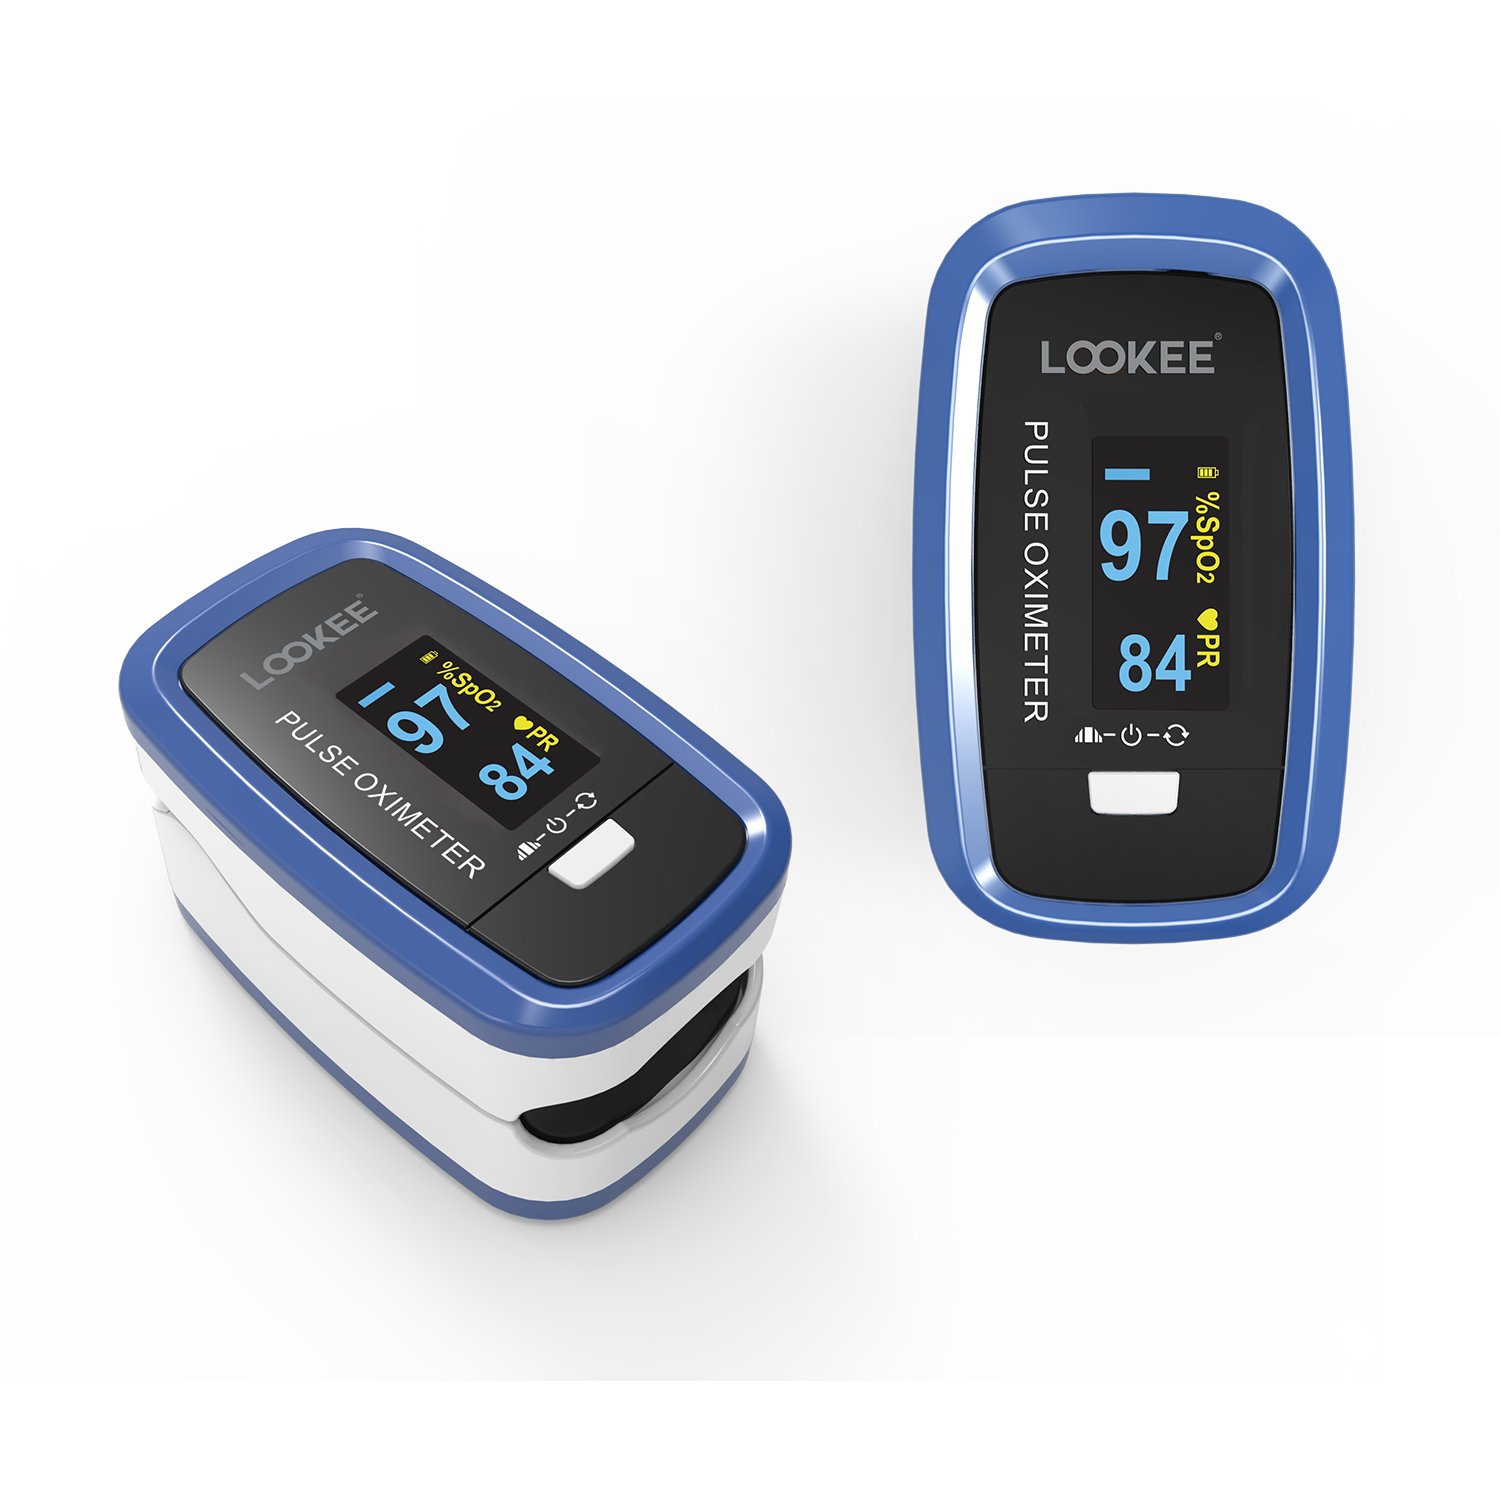 LOOKEE® LK50D1A Deluxe Finger Pulse Oximeter | Blood Oxygen Saturation Monitor with Auto-Rotate Screen, Plethysmograph Waveform | From a Canadian Brand